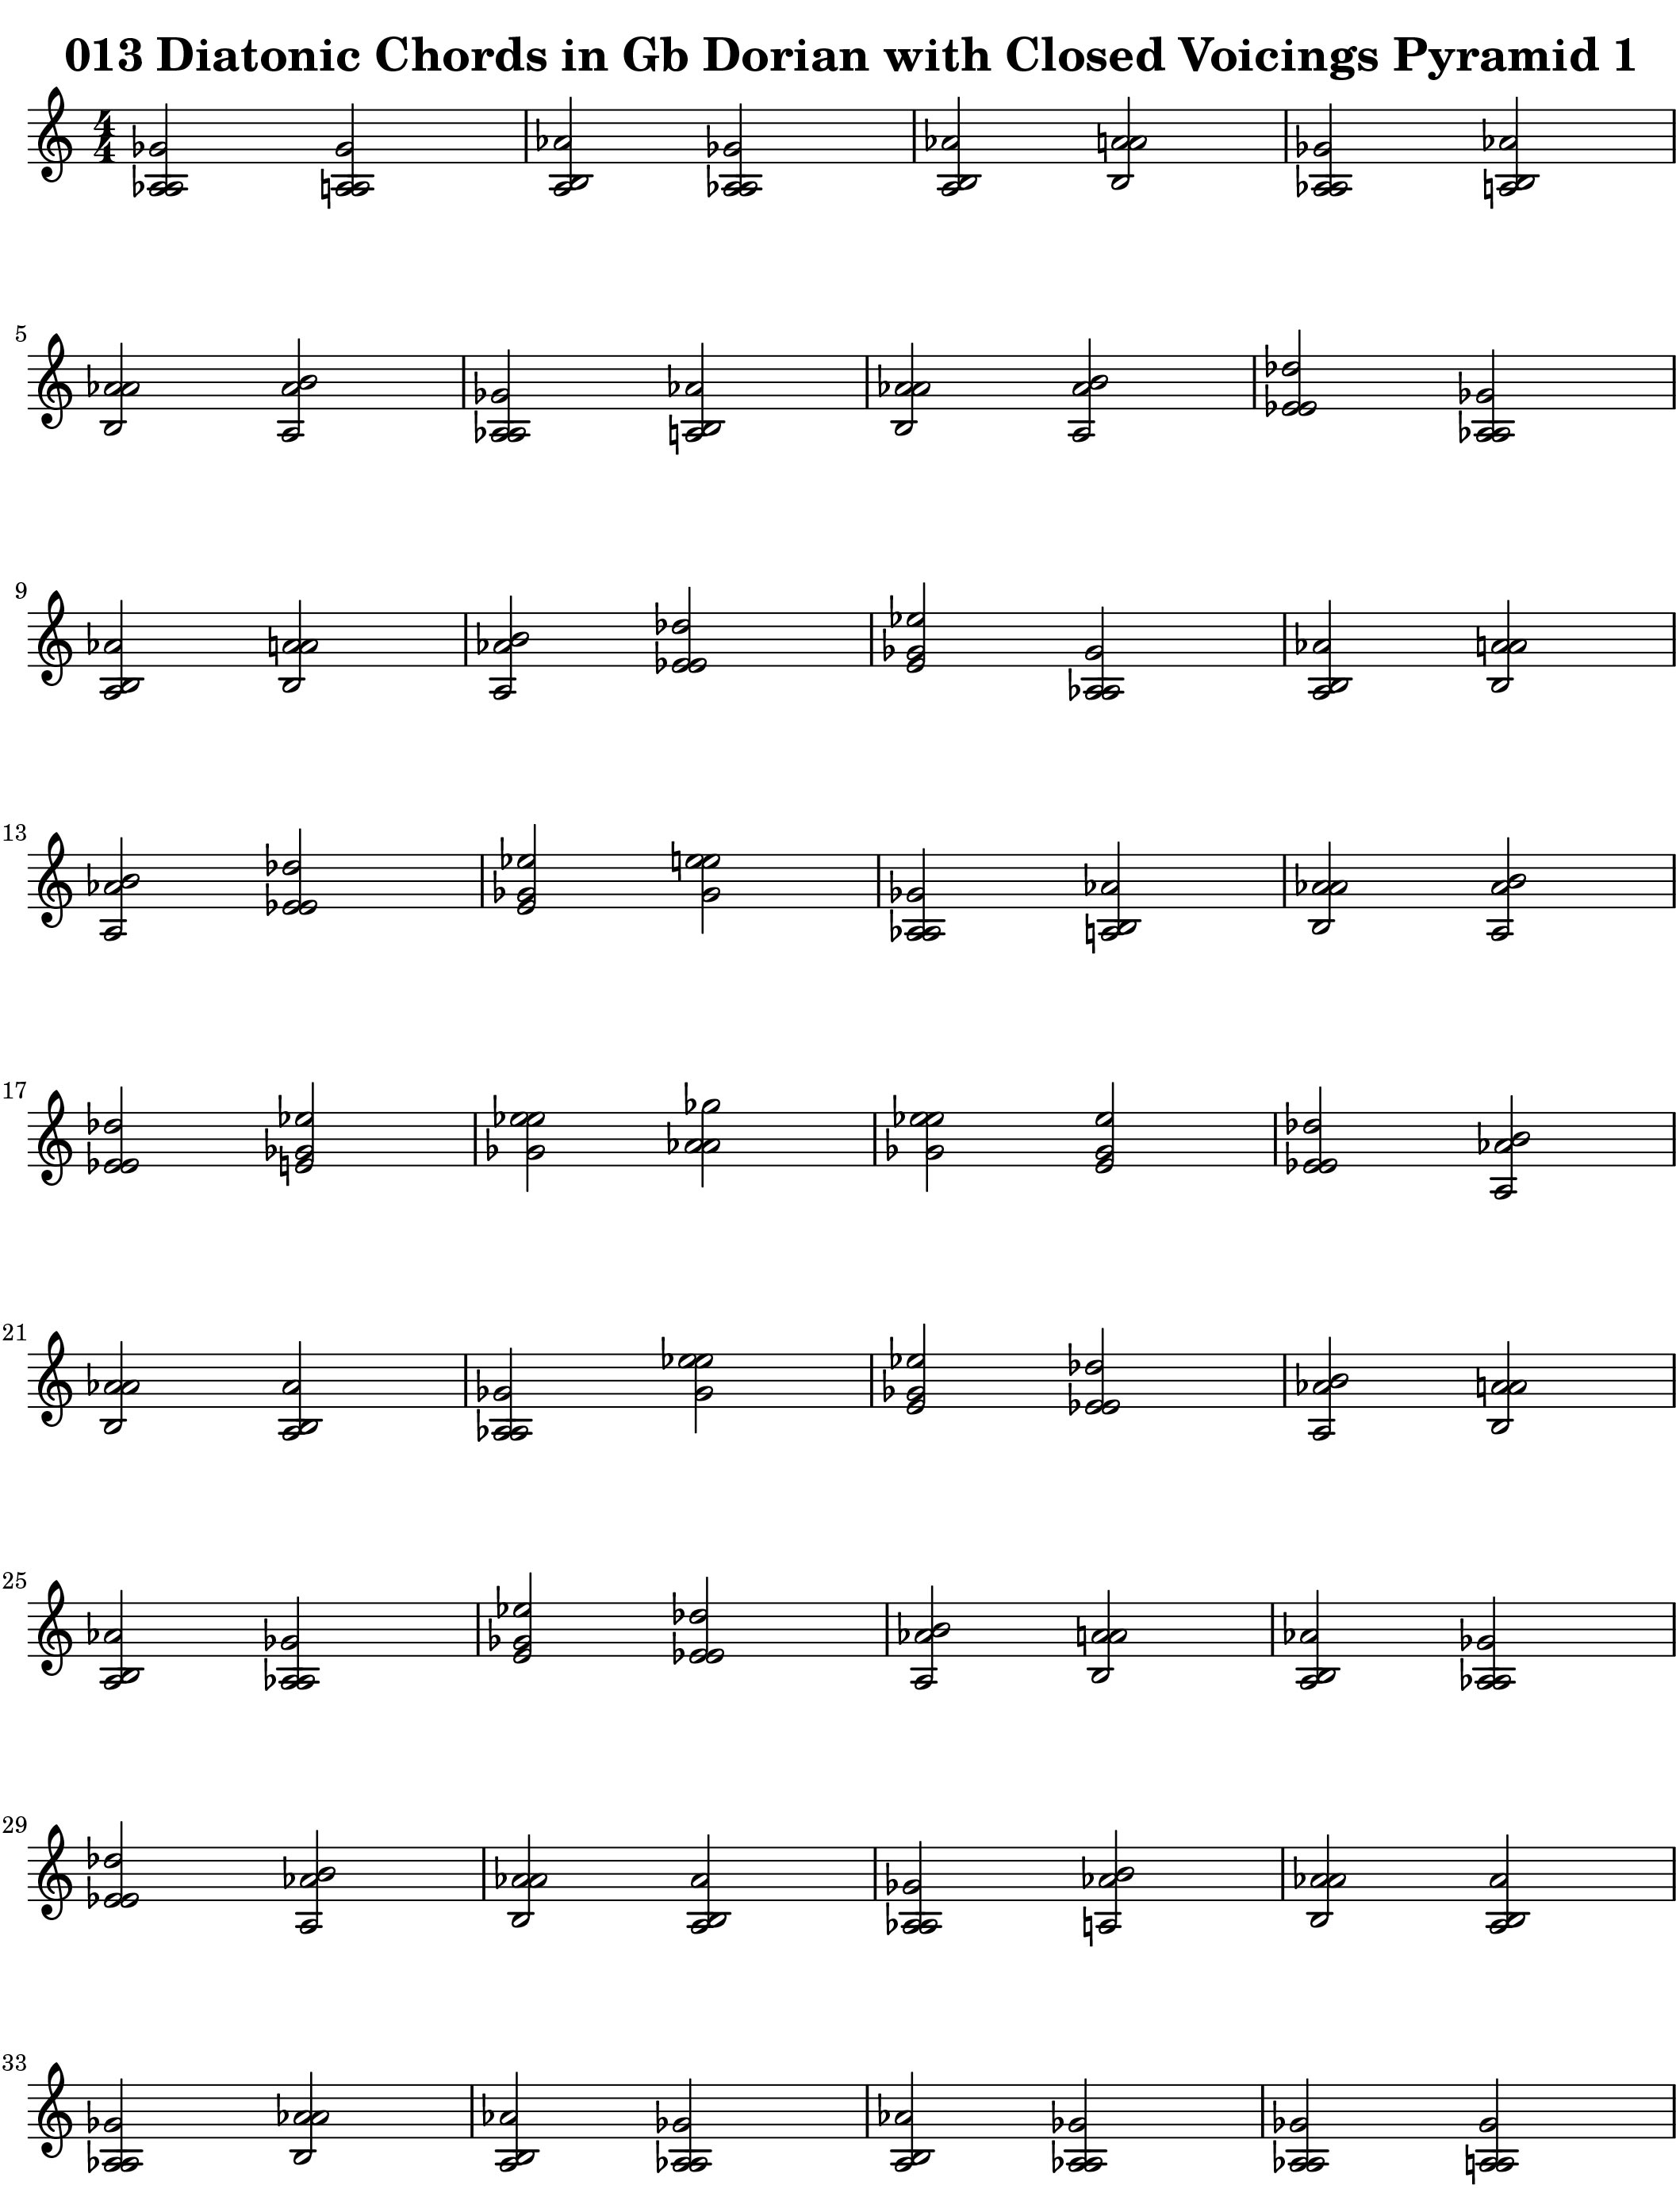 Gb Dorian Example from 013 Diatonic Chords for Major Modes: Pyramid Volume One